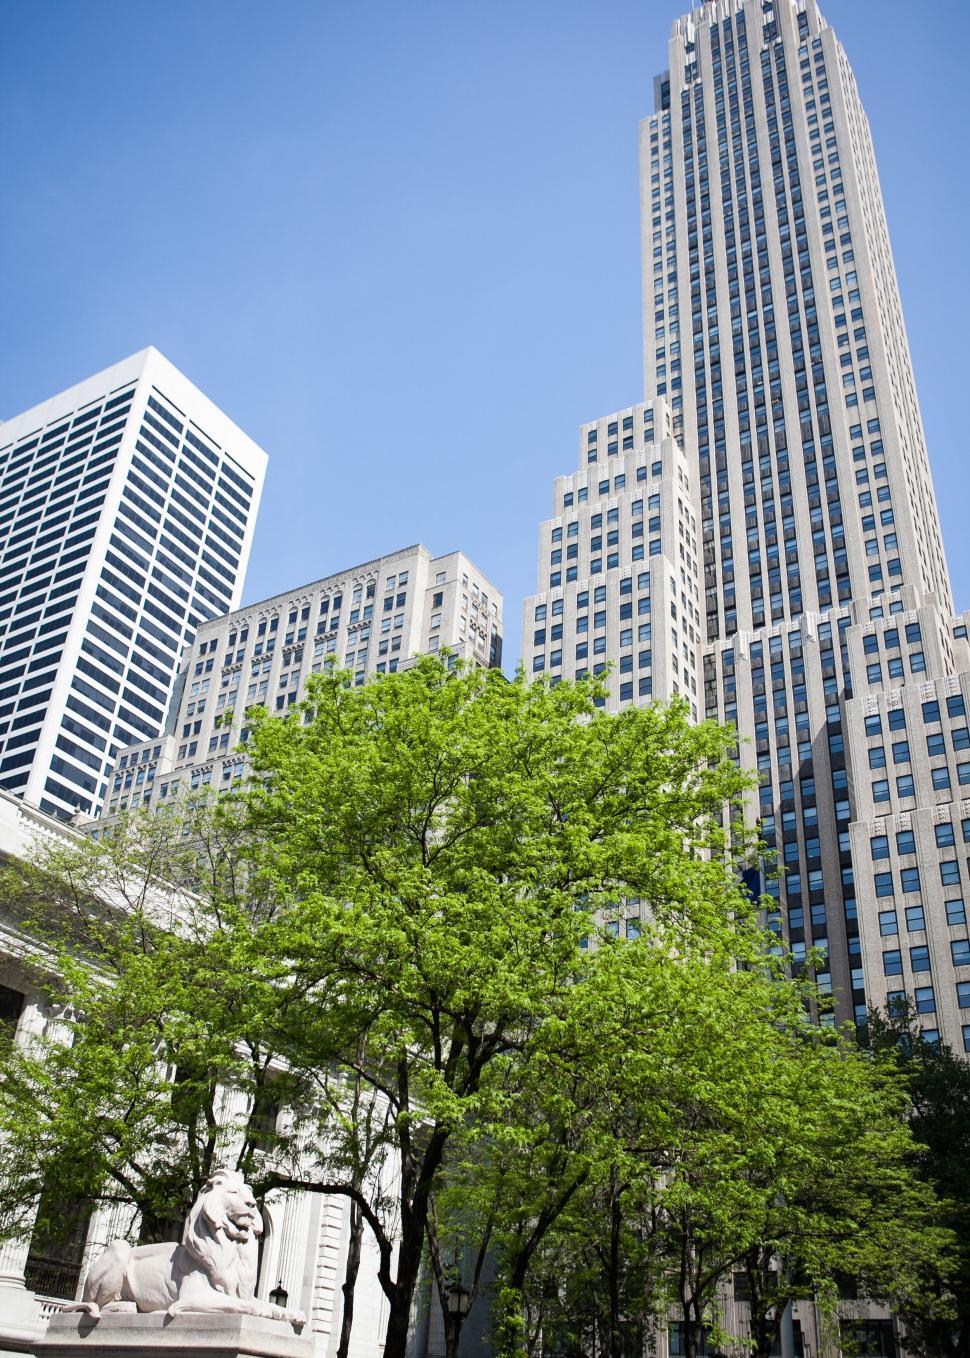 Free Image of Urban landscape with skyscrapers and statue 